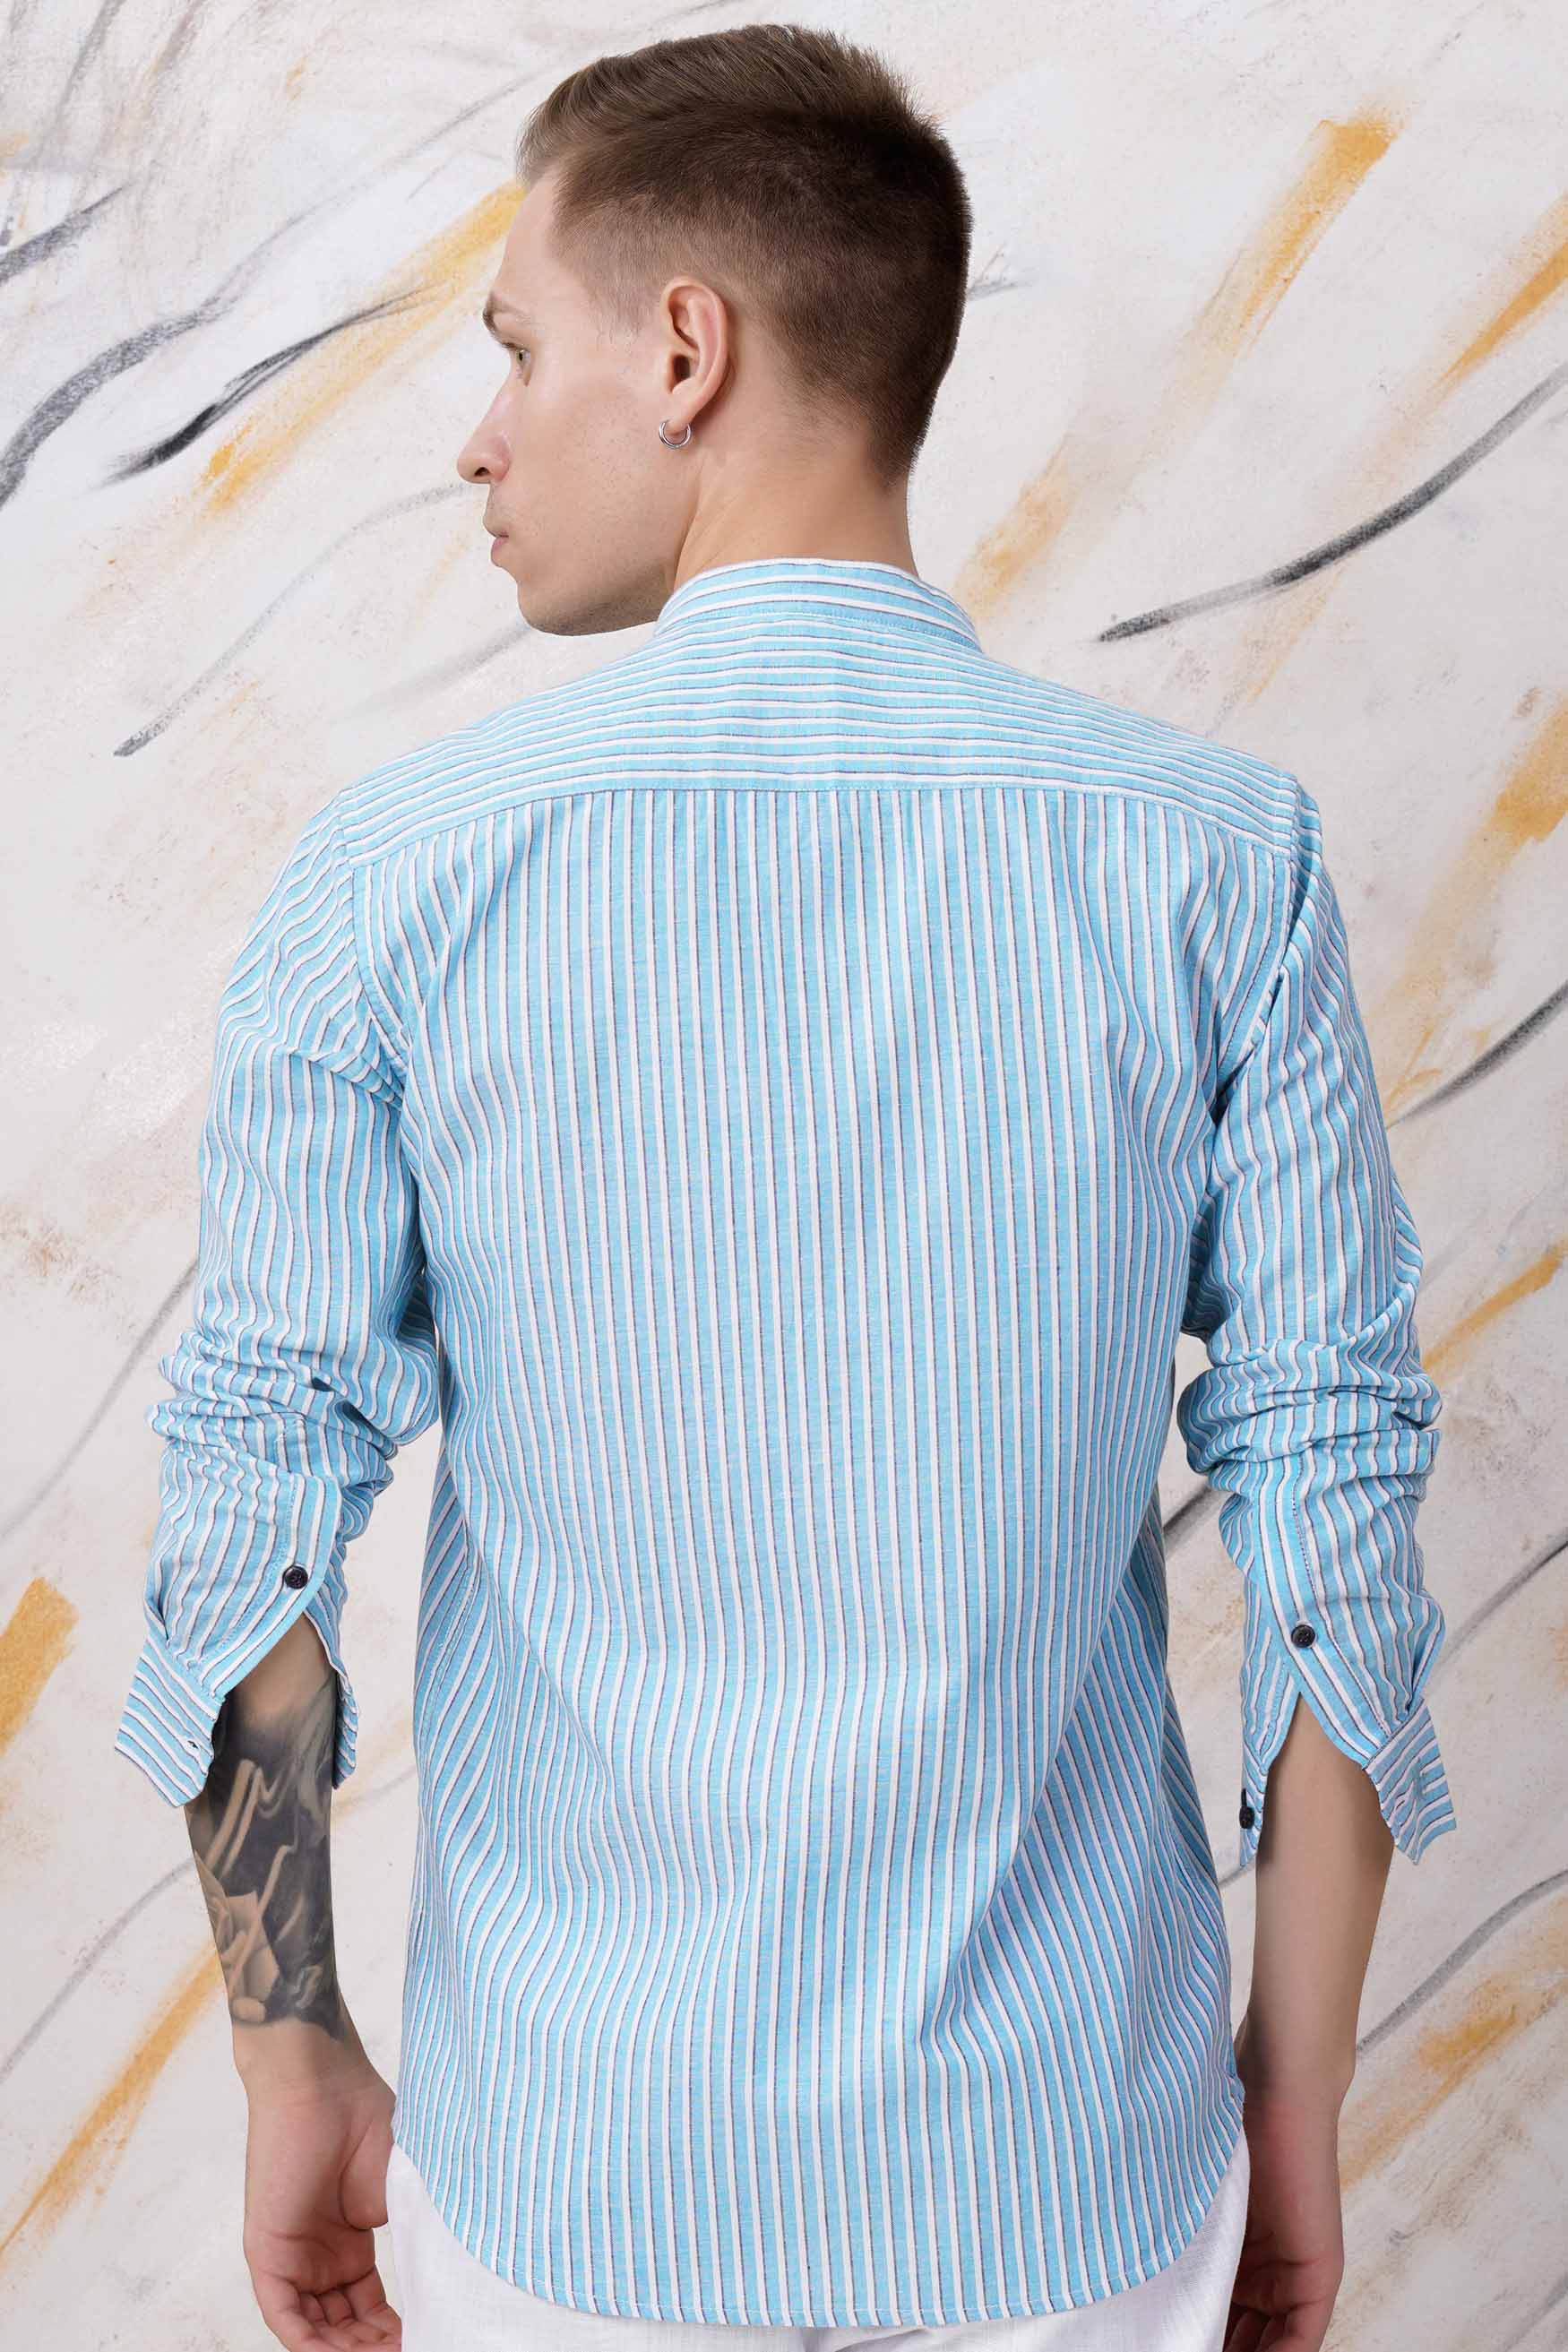 Blizzard Blue and White Striped Luxurious Linen Shirt 11482-M-BLE-38, 11482-M-BLE-H-38, 11482-M-BLE-39, 11482-M-BLE-H-39, 11482-M-BLE-40, 11482-M-BLE-H-40, 11482-M-BLE-42, 11482-M-BLE-H-42, 11482-M-BLE-44, 11482-M-BLE-H-44, 11482-M-BLE-46, 11482-M-BLE-H-46, 11482-M-BLE-48, 11482-M-BLE-H-48, 11482-M-BLE-50, 11482-M-BLE-H-50, 11482-M-BLE-52, 11482-M-BLE-H-52